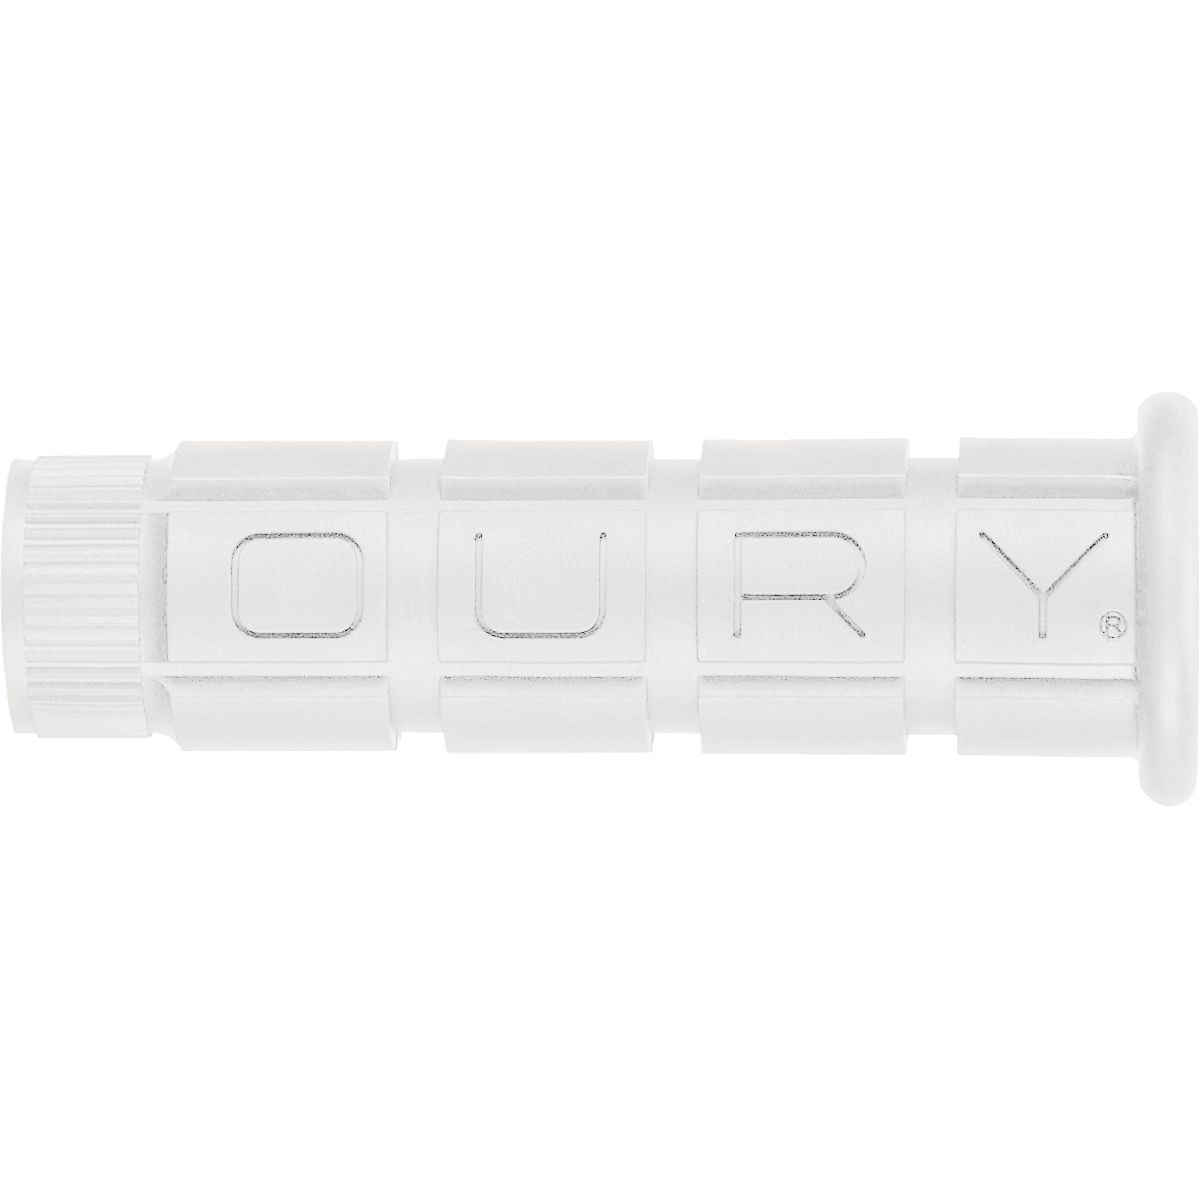 Oury Grip Single Compound Grips